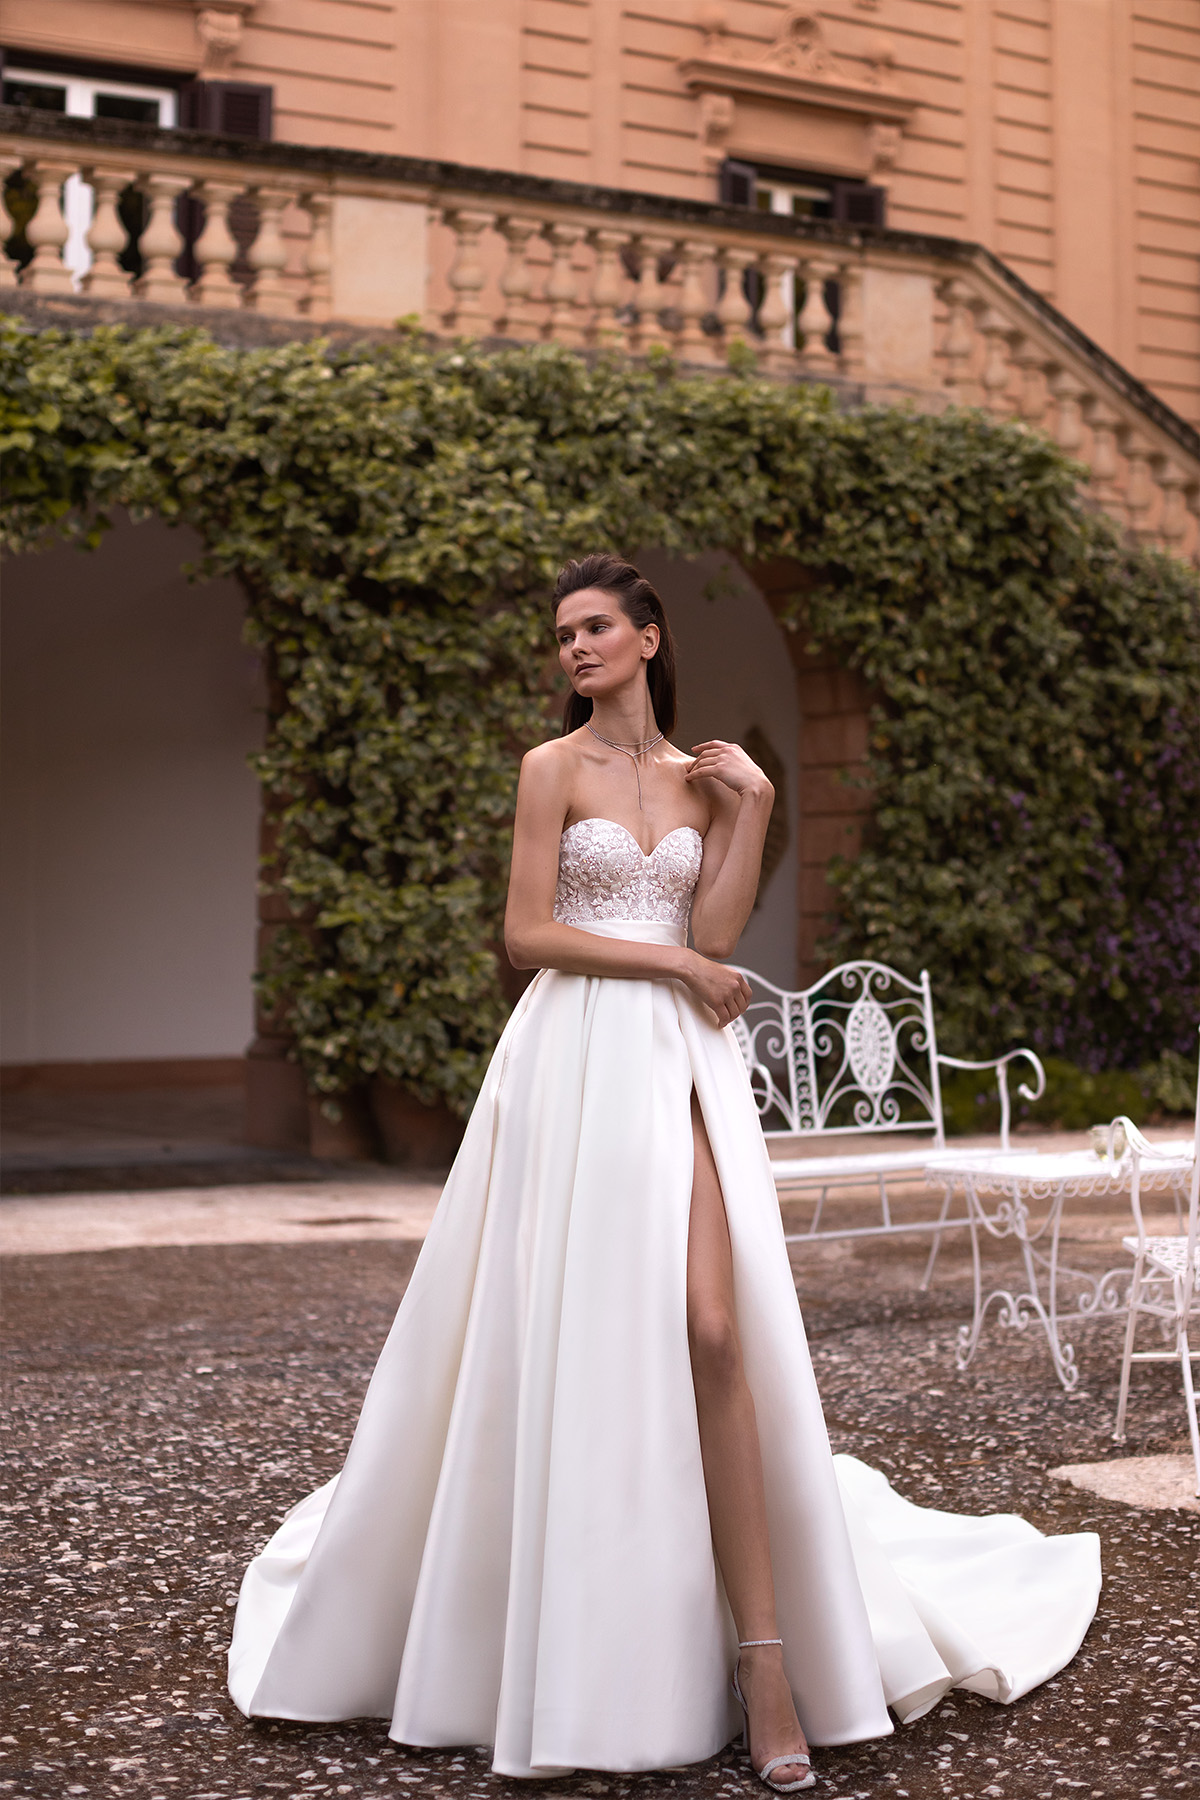 Mairgold wedding dress with tulle skirt from Palermo